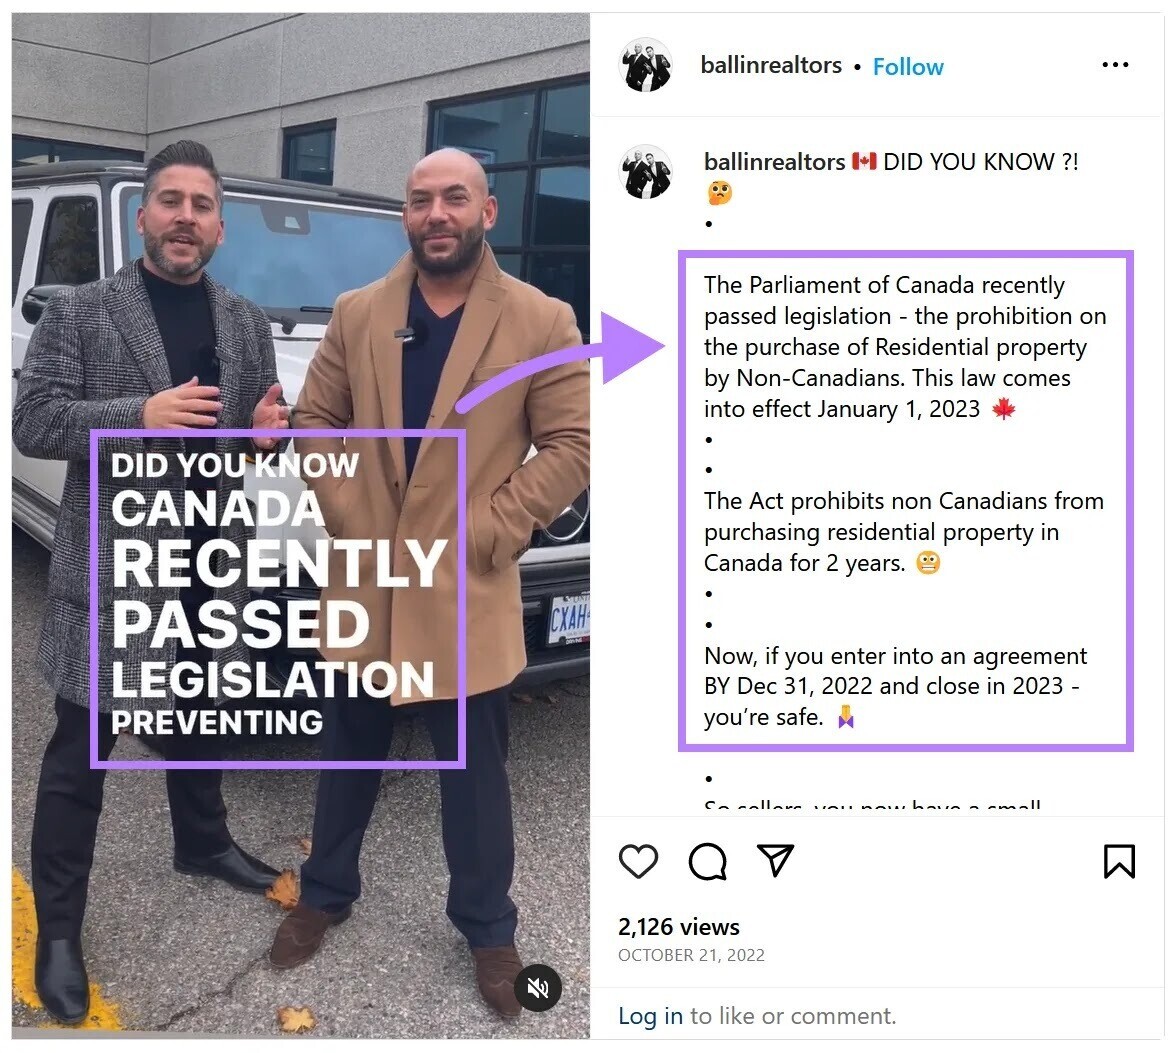 An Instagram post highlighting a market update that impacts real estate decisions